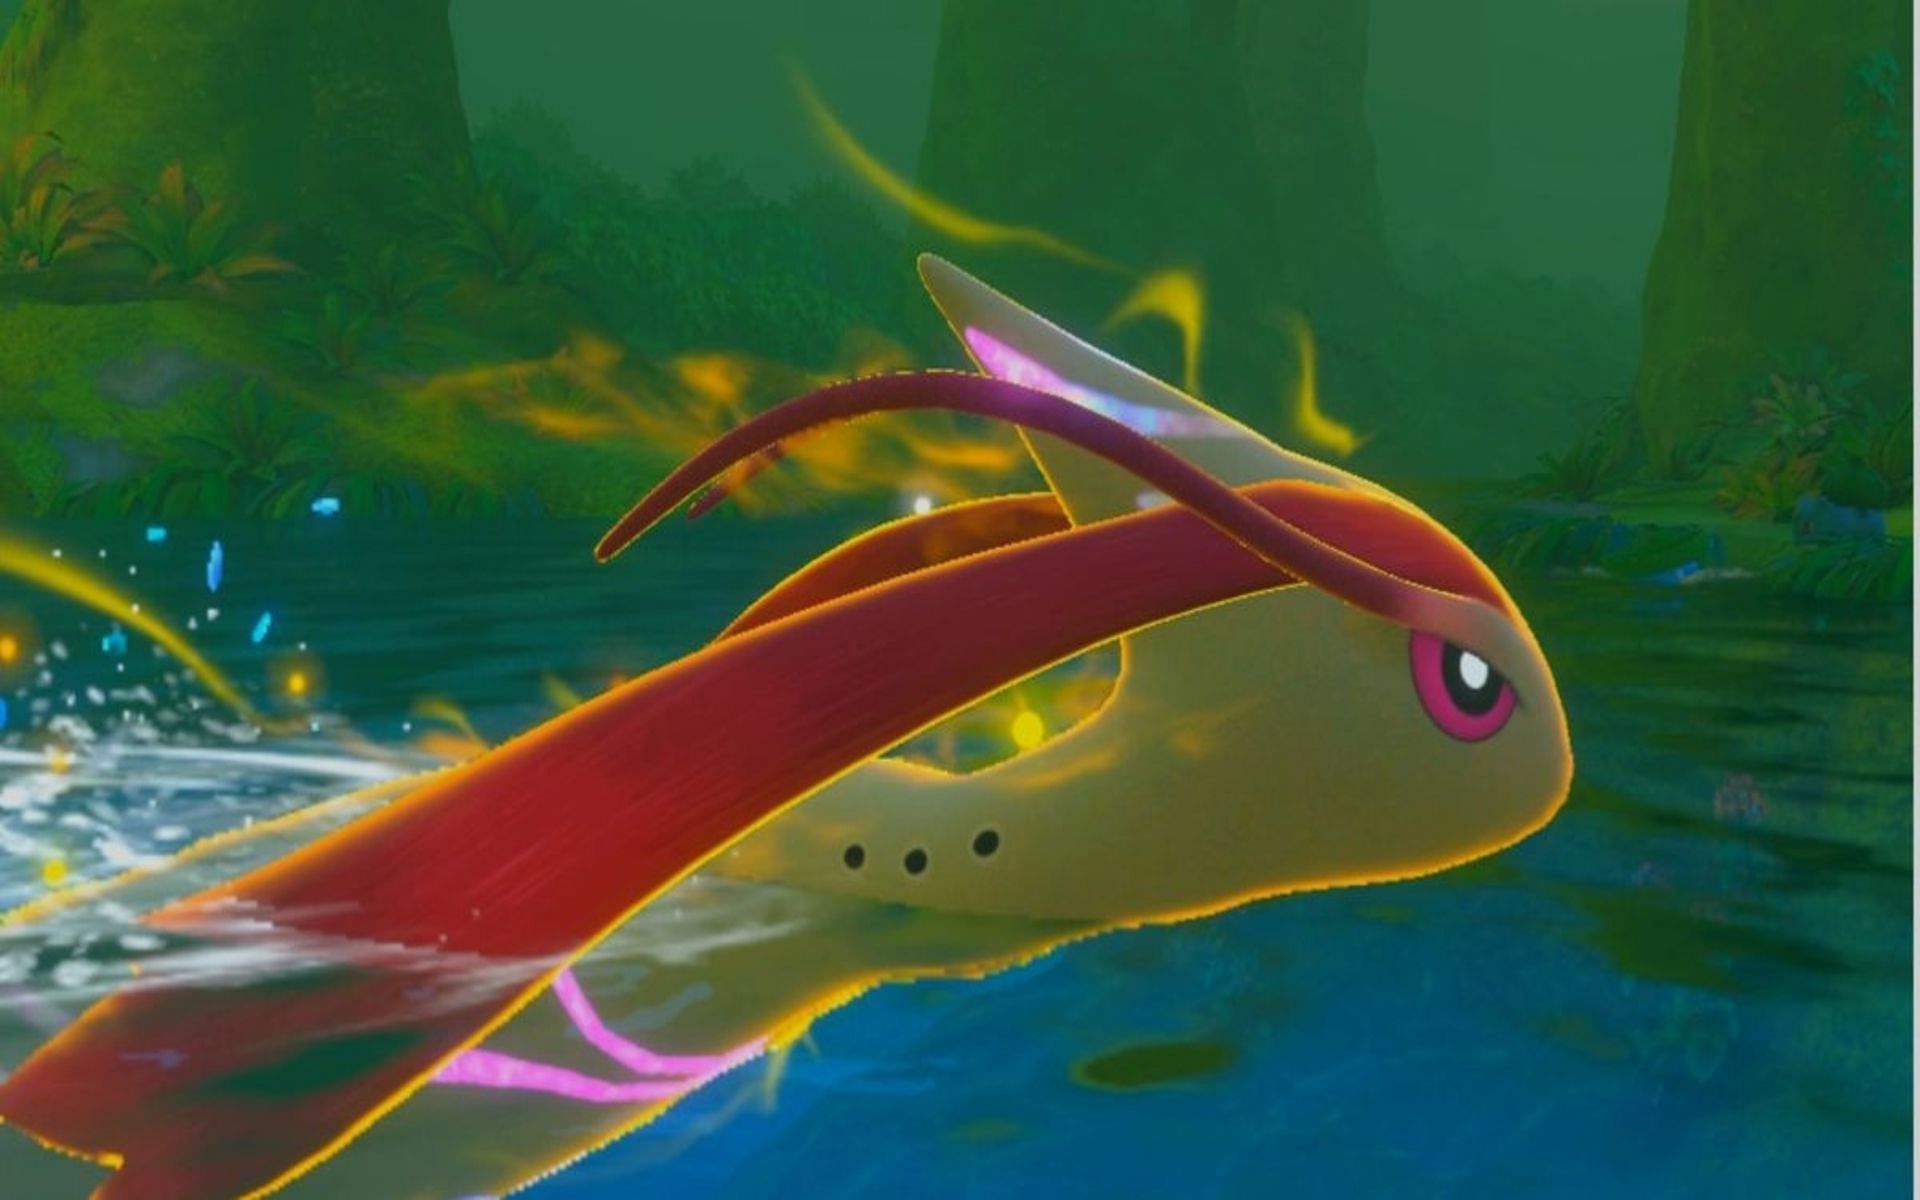 Milotic can learn unique Water-type moves, including Aqua Ring and Scald (Image via Bandai Namco)